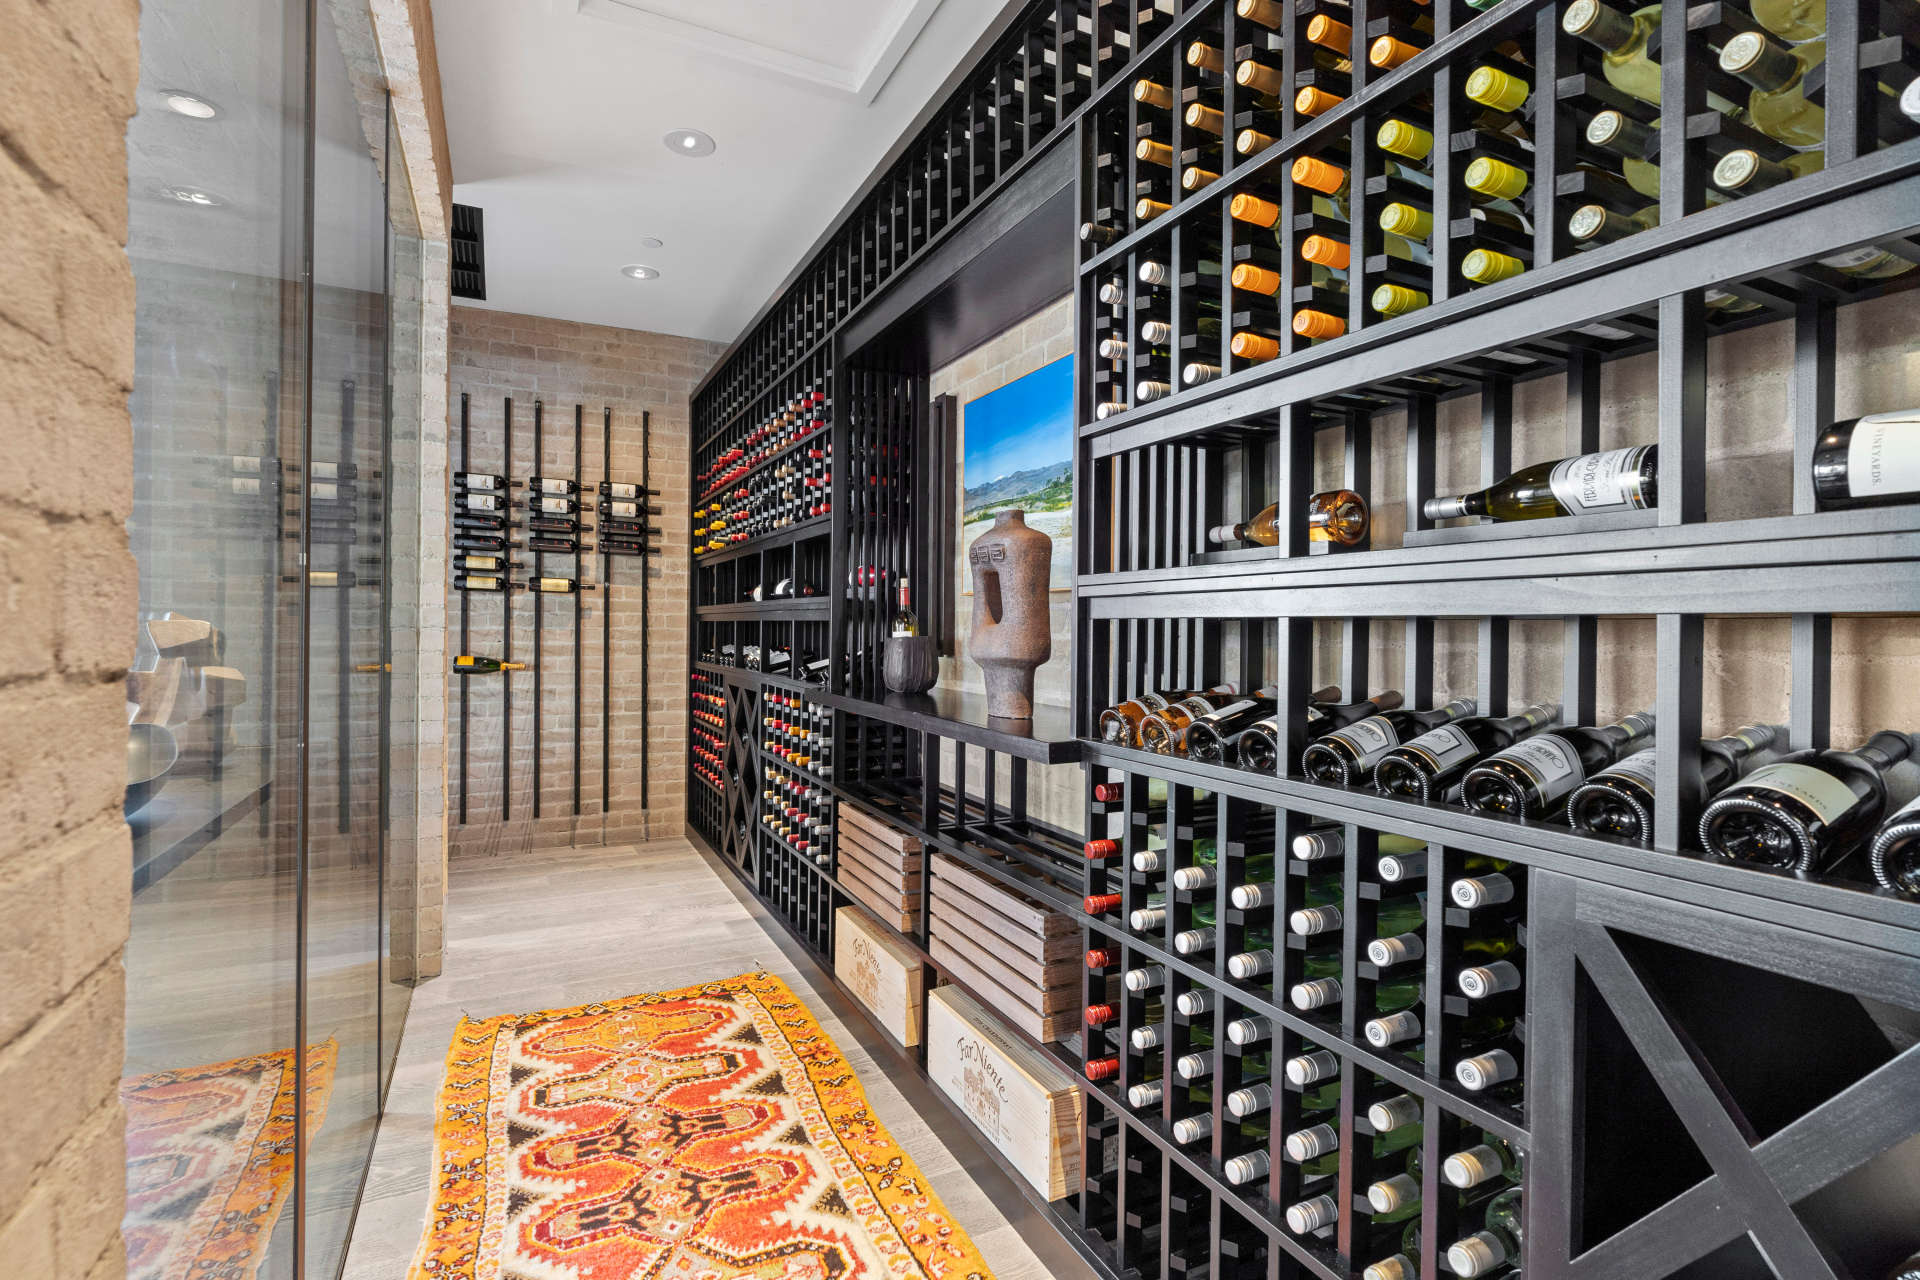 An extensive wine cellar stocked with a wide variety of bottles.